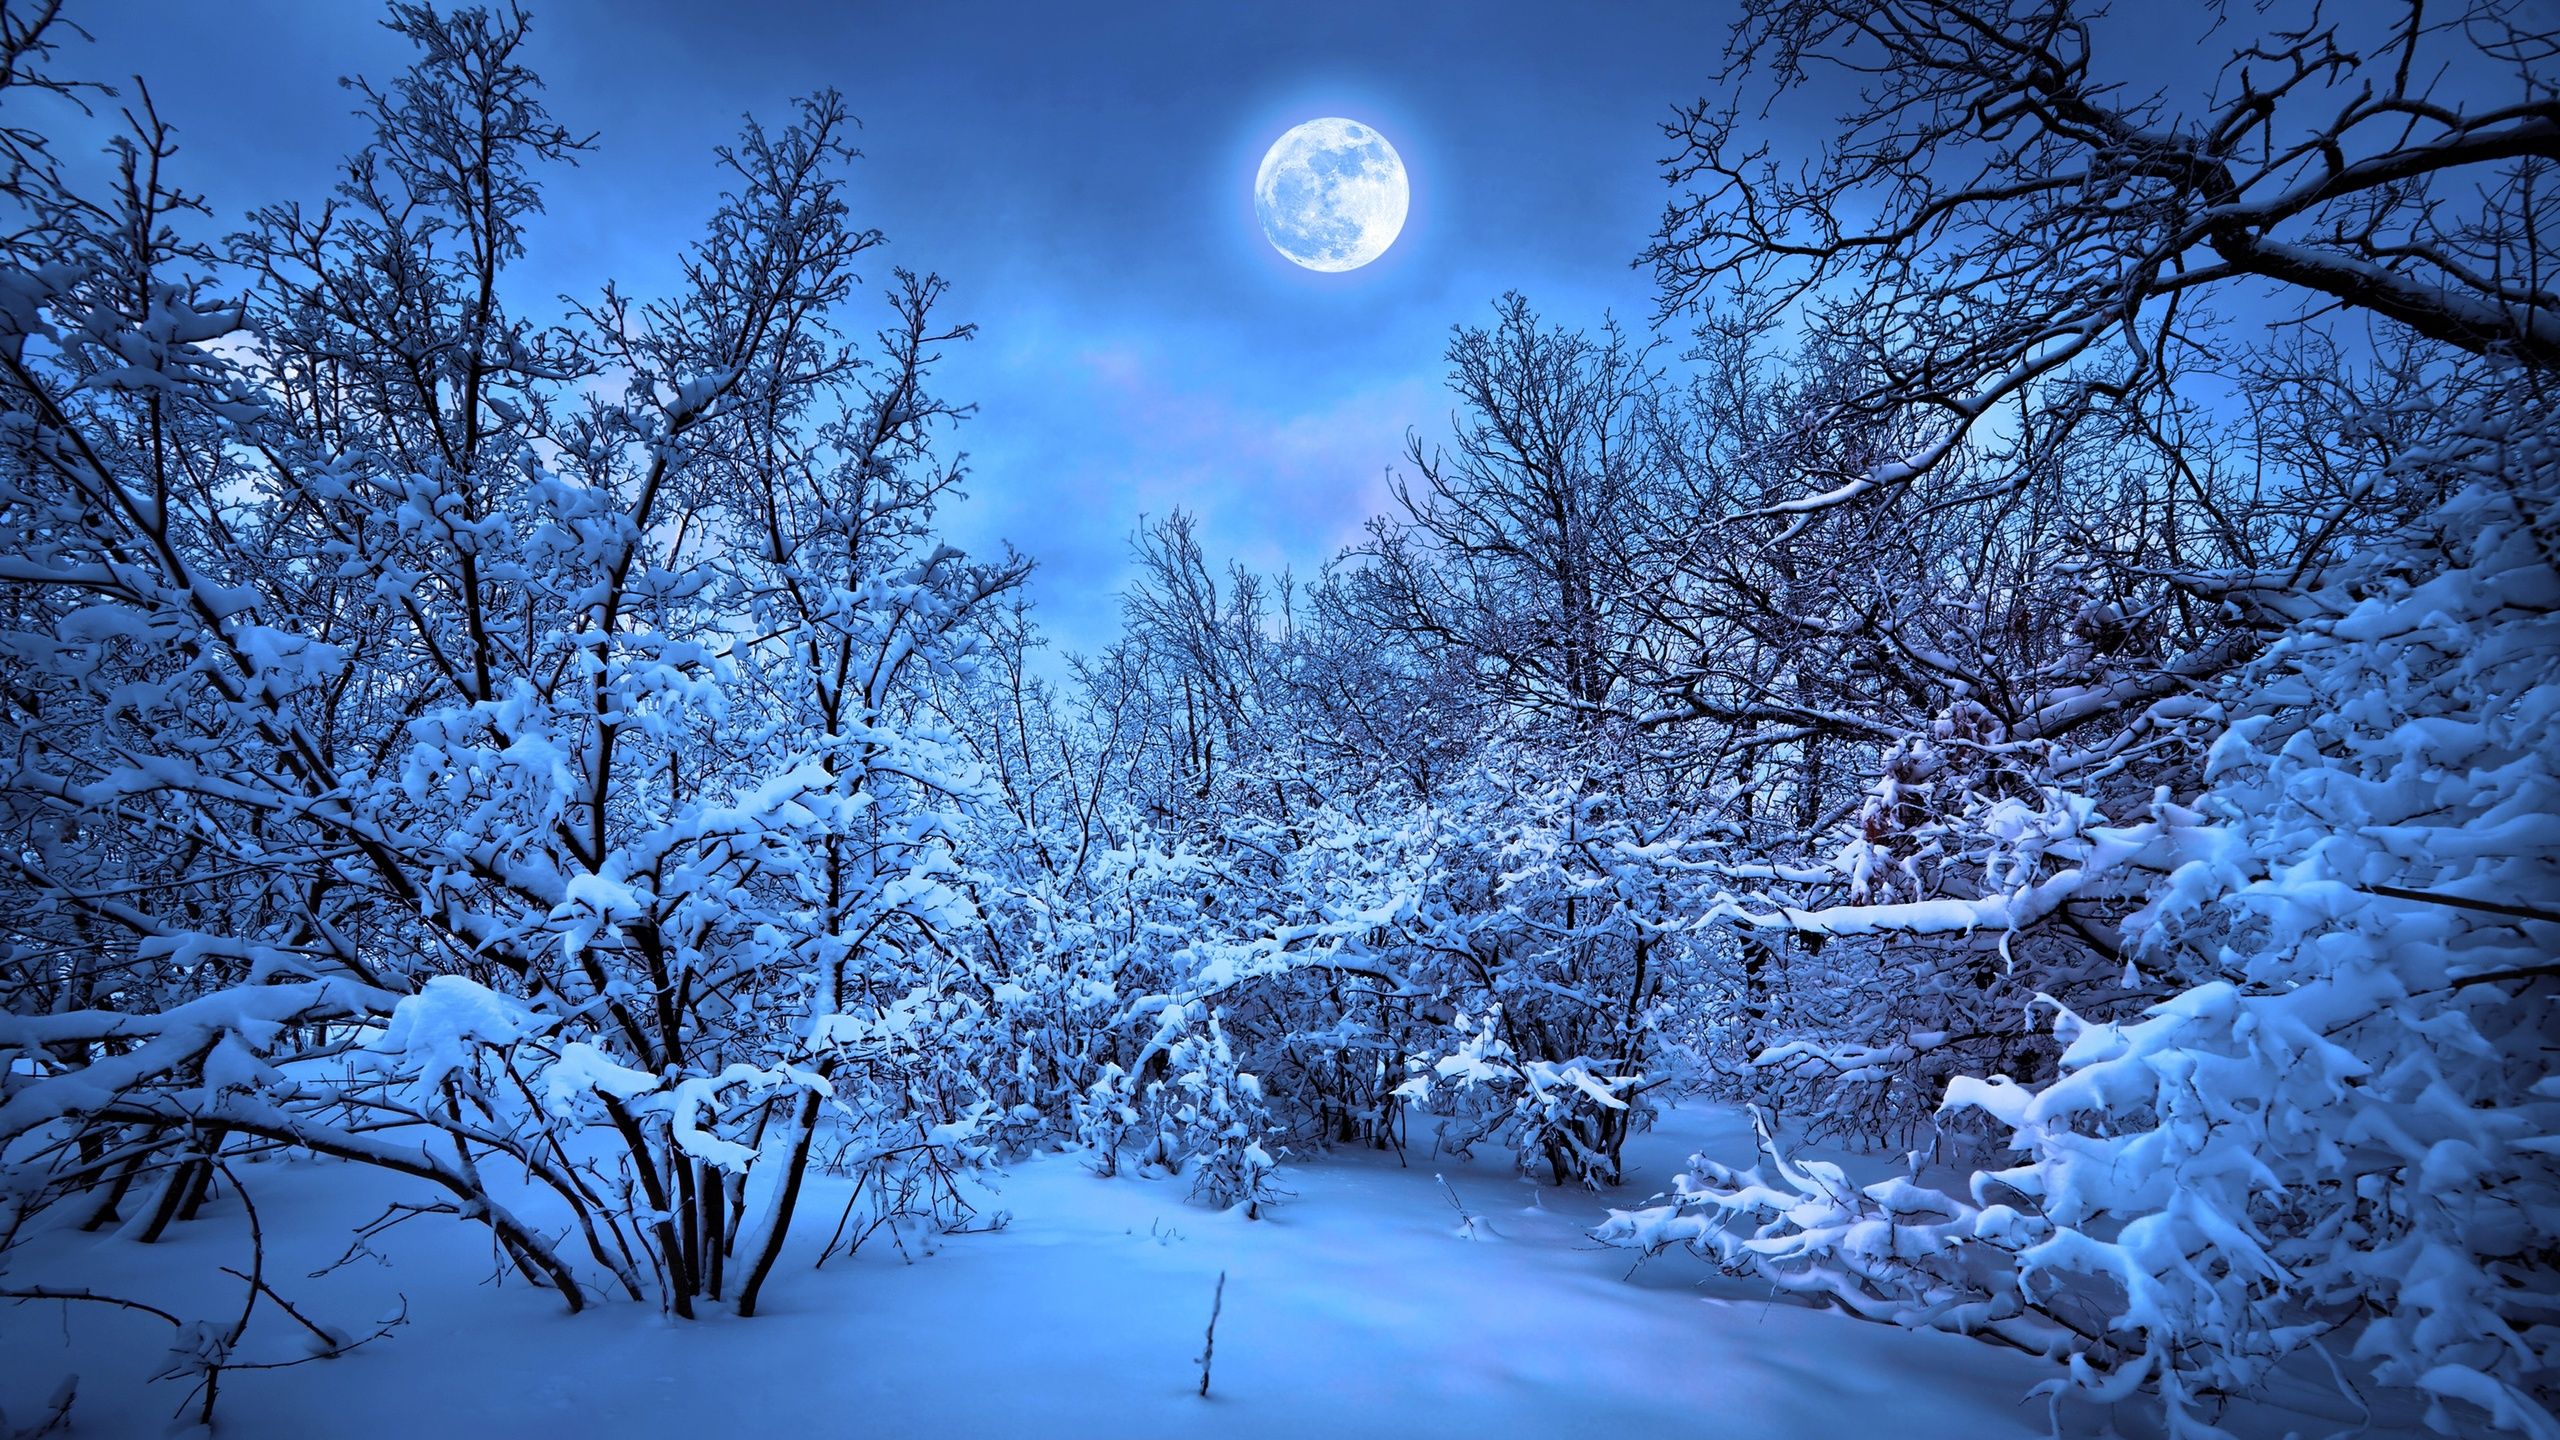 Winter Snow Nature 4k 1440P Resolution HD 4k Wallpaper, Image, Background, Photo and Picture